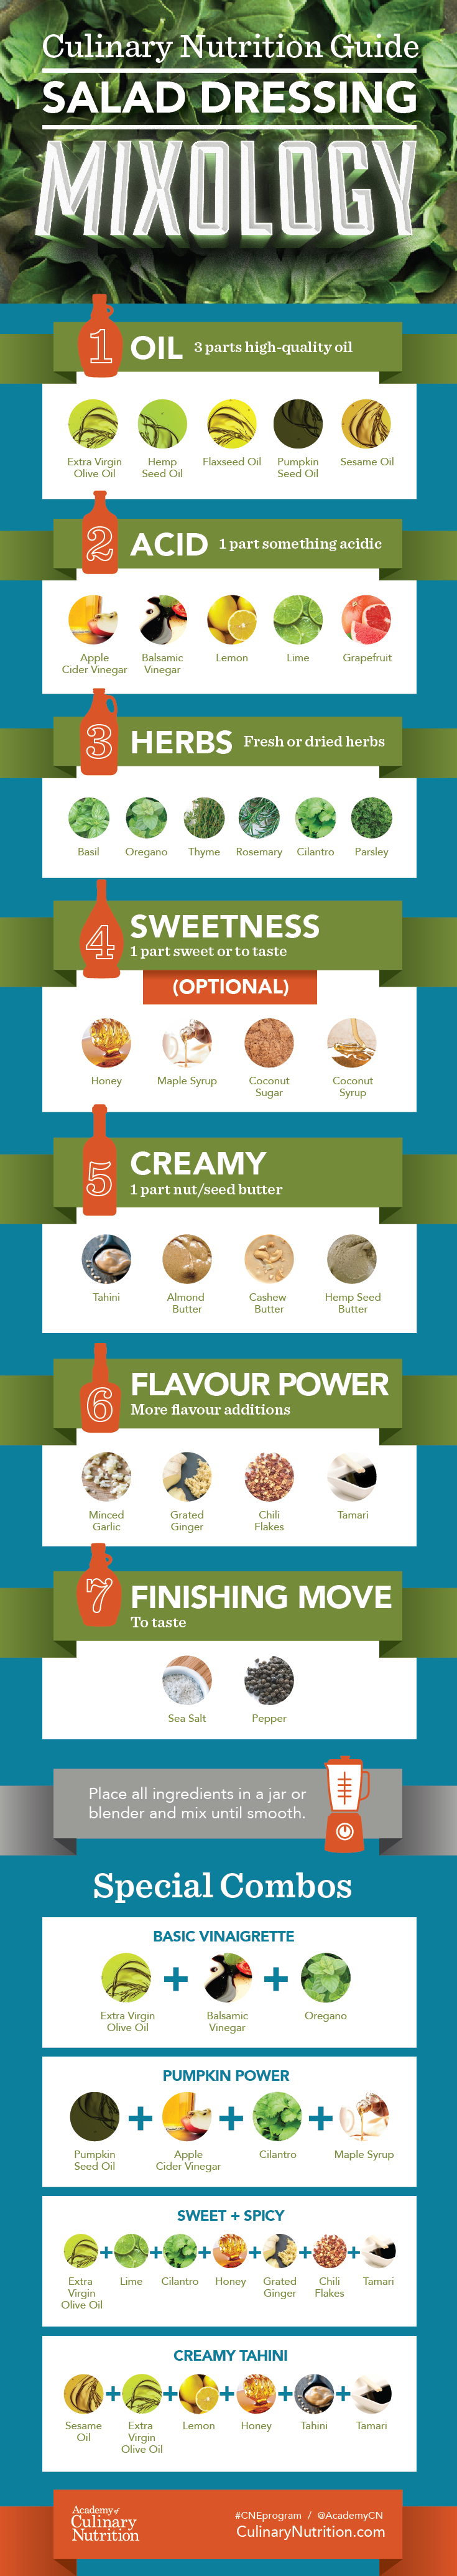 Perfecting Your Salad Game: Salad Dressing Mixology Infographic